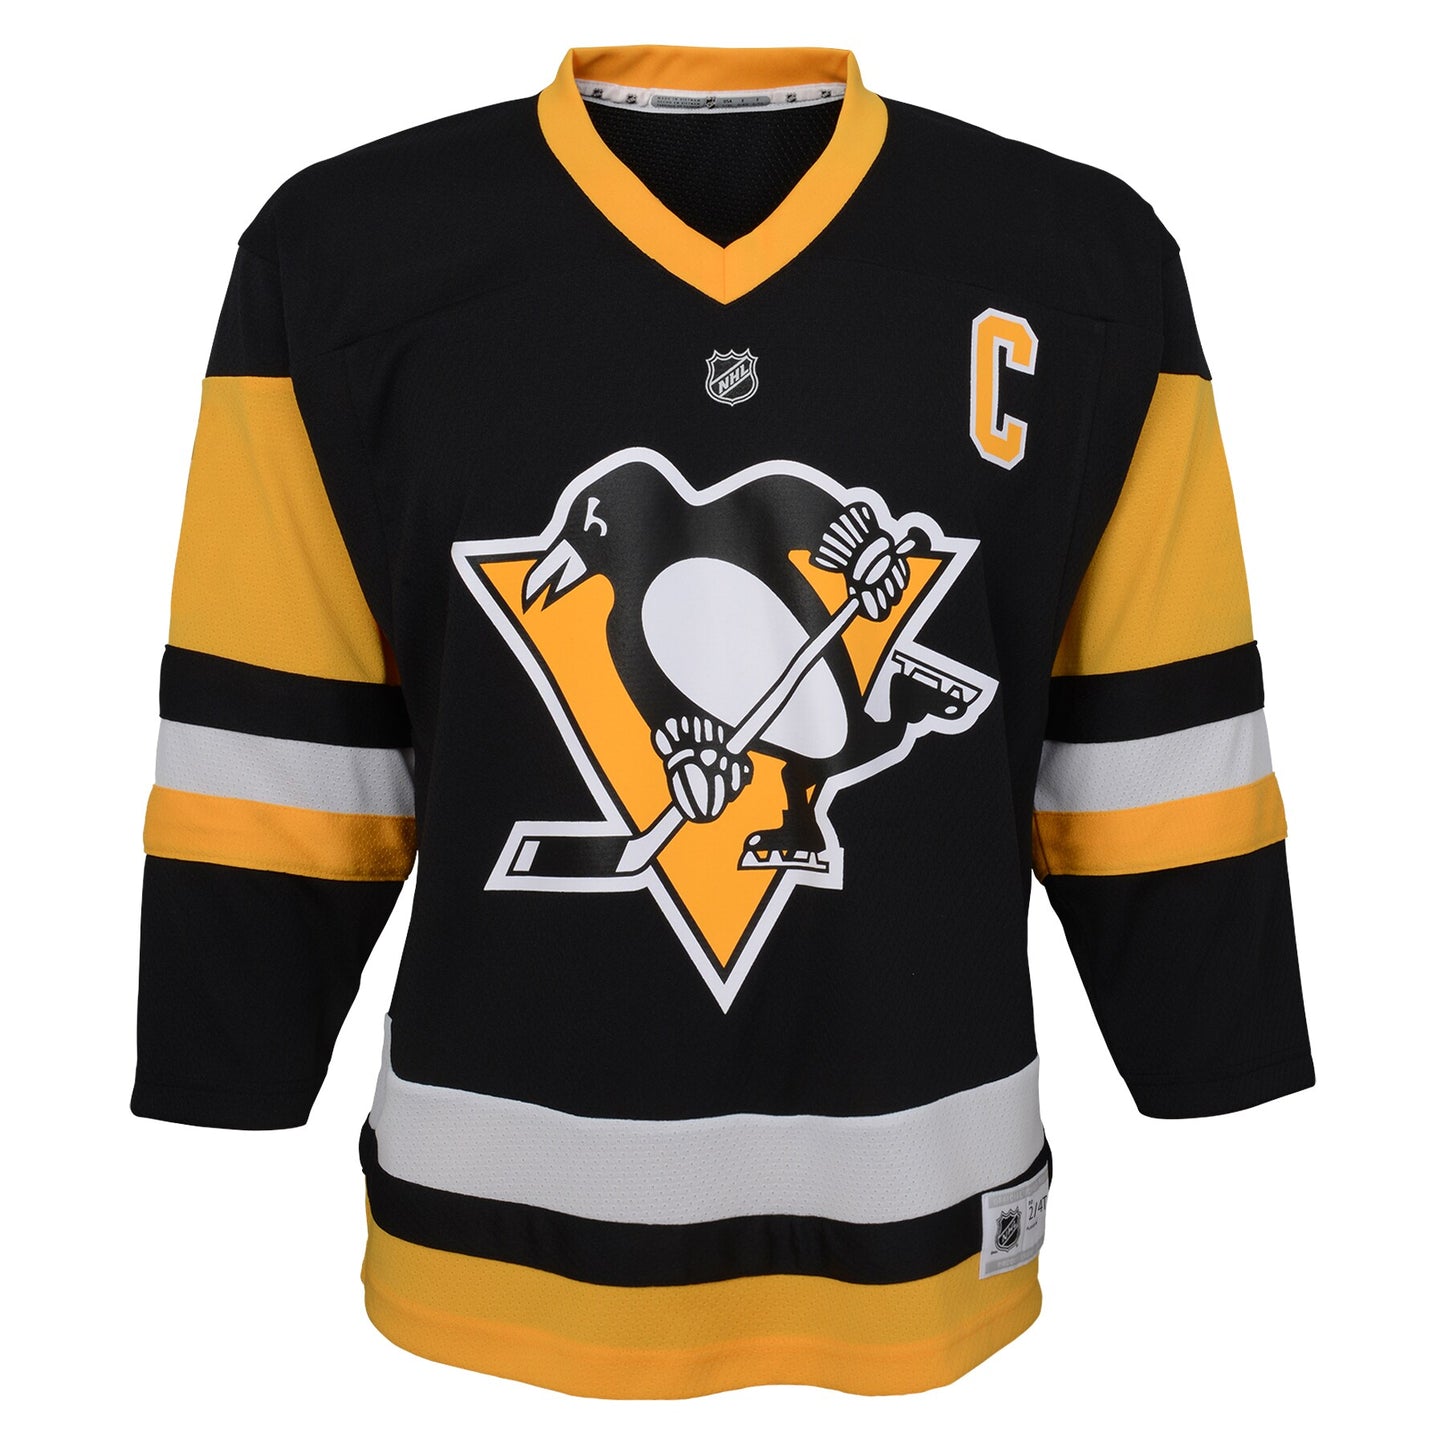 Sidney Crosby Pittsburgh Penguins Toddler Replica Player Jersey - Black